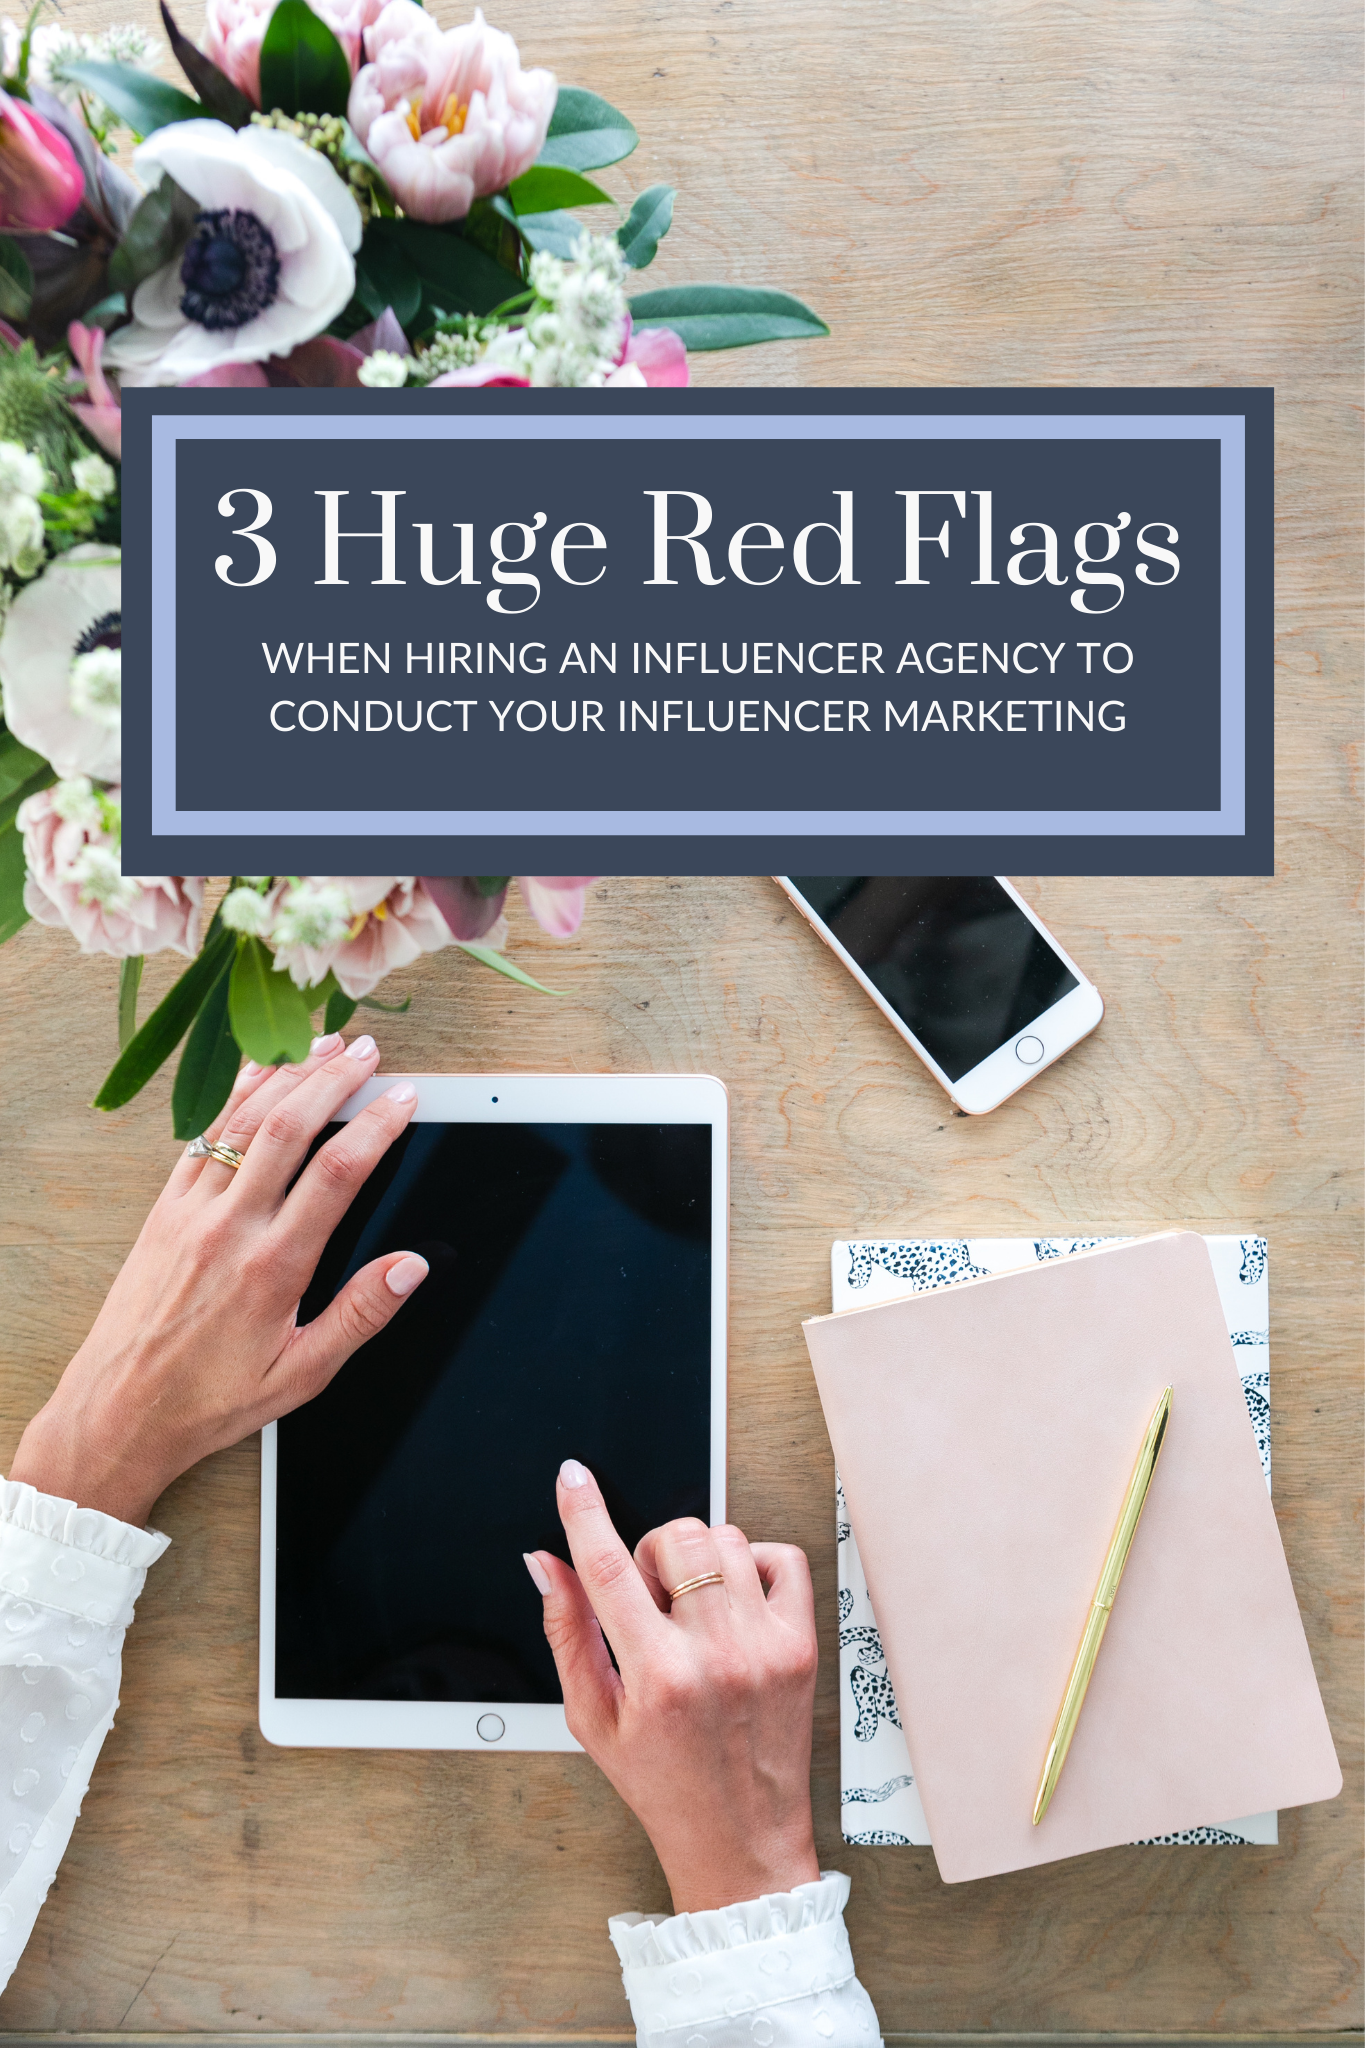 THREE Huge Red Flags When Hiring an Influencer Agency